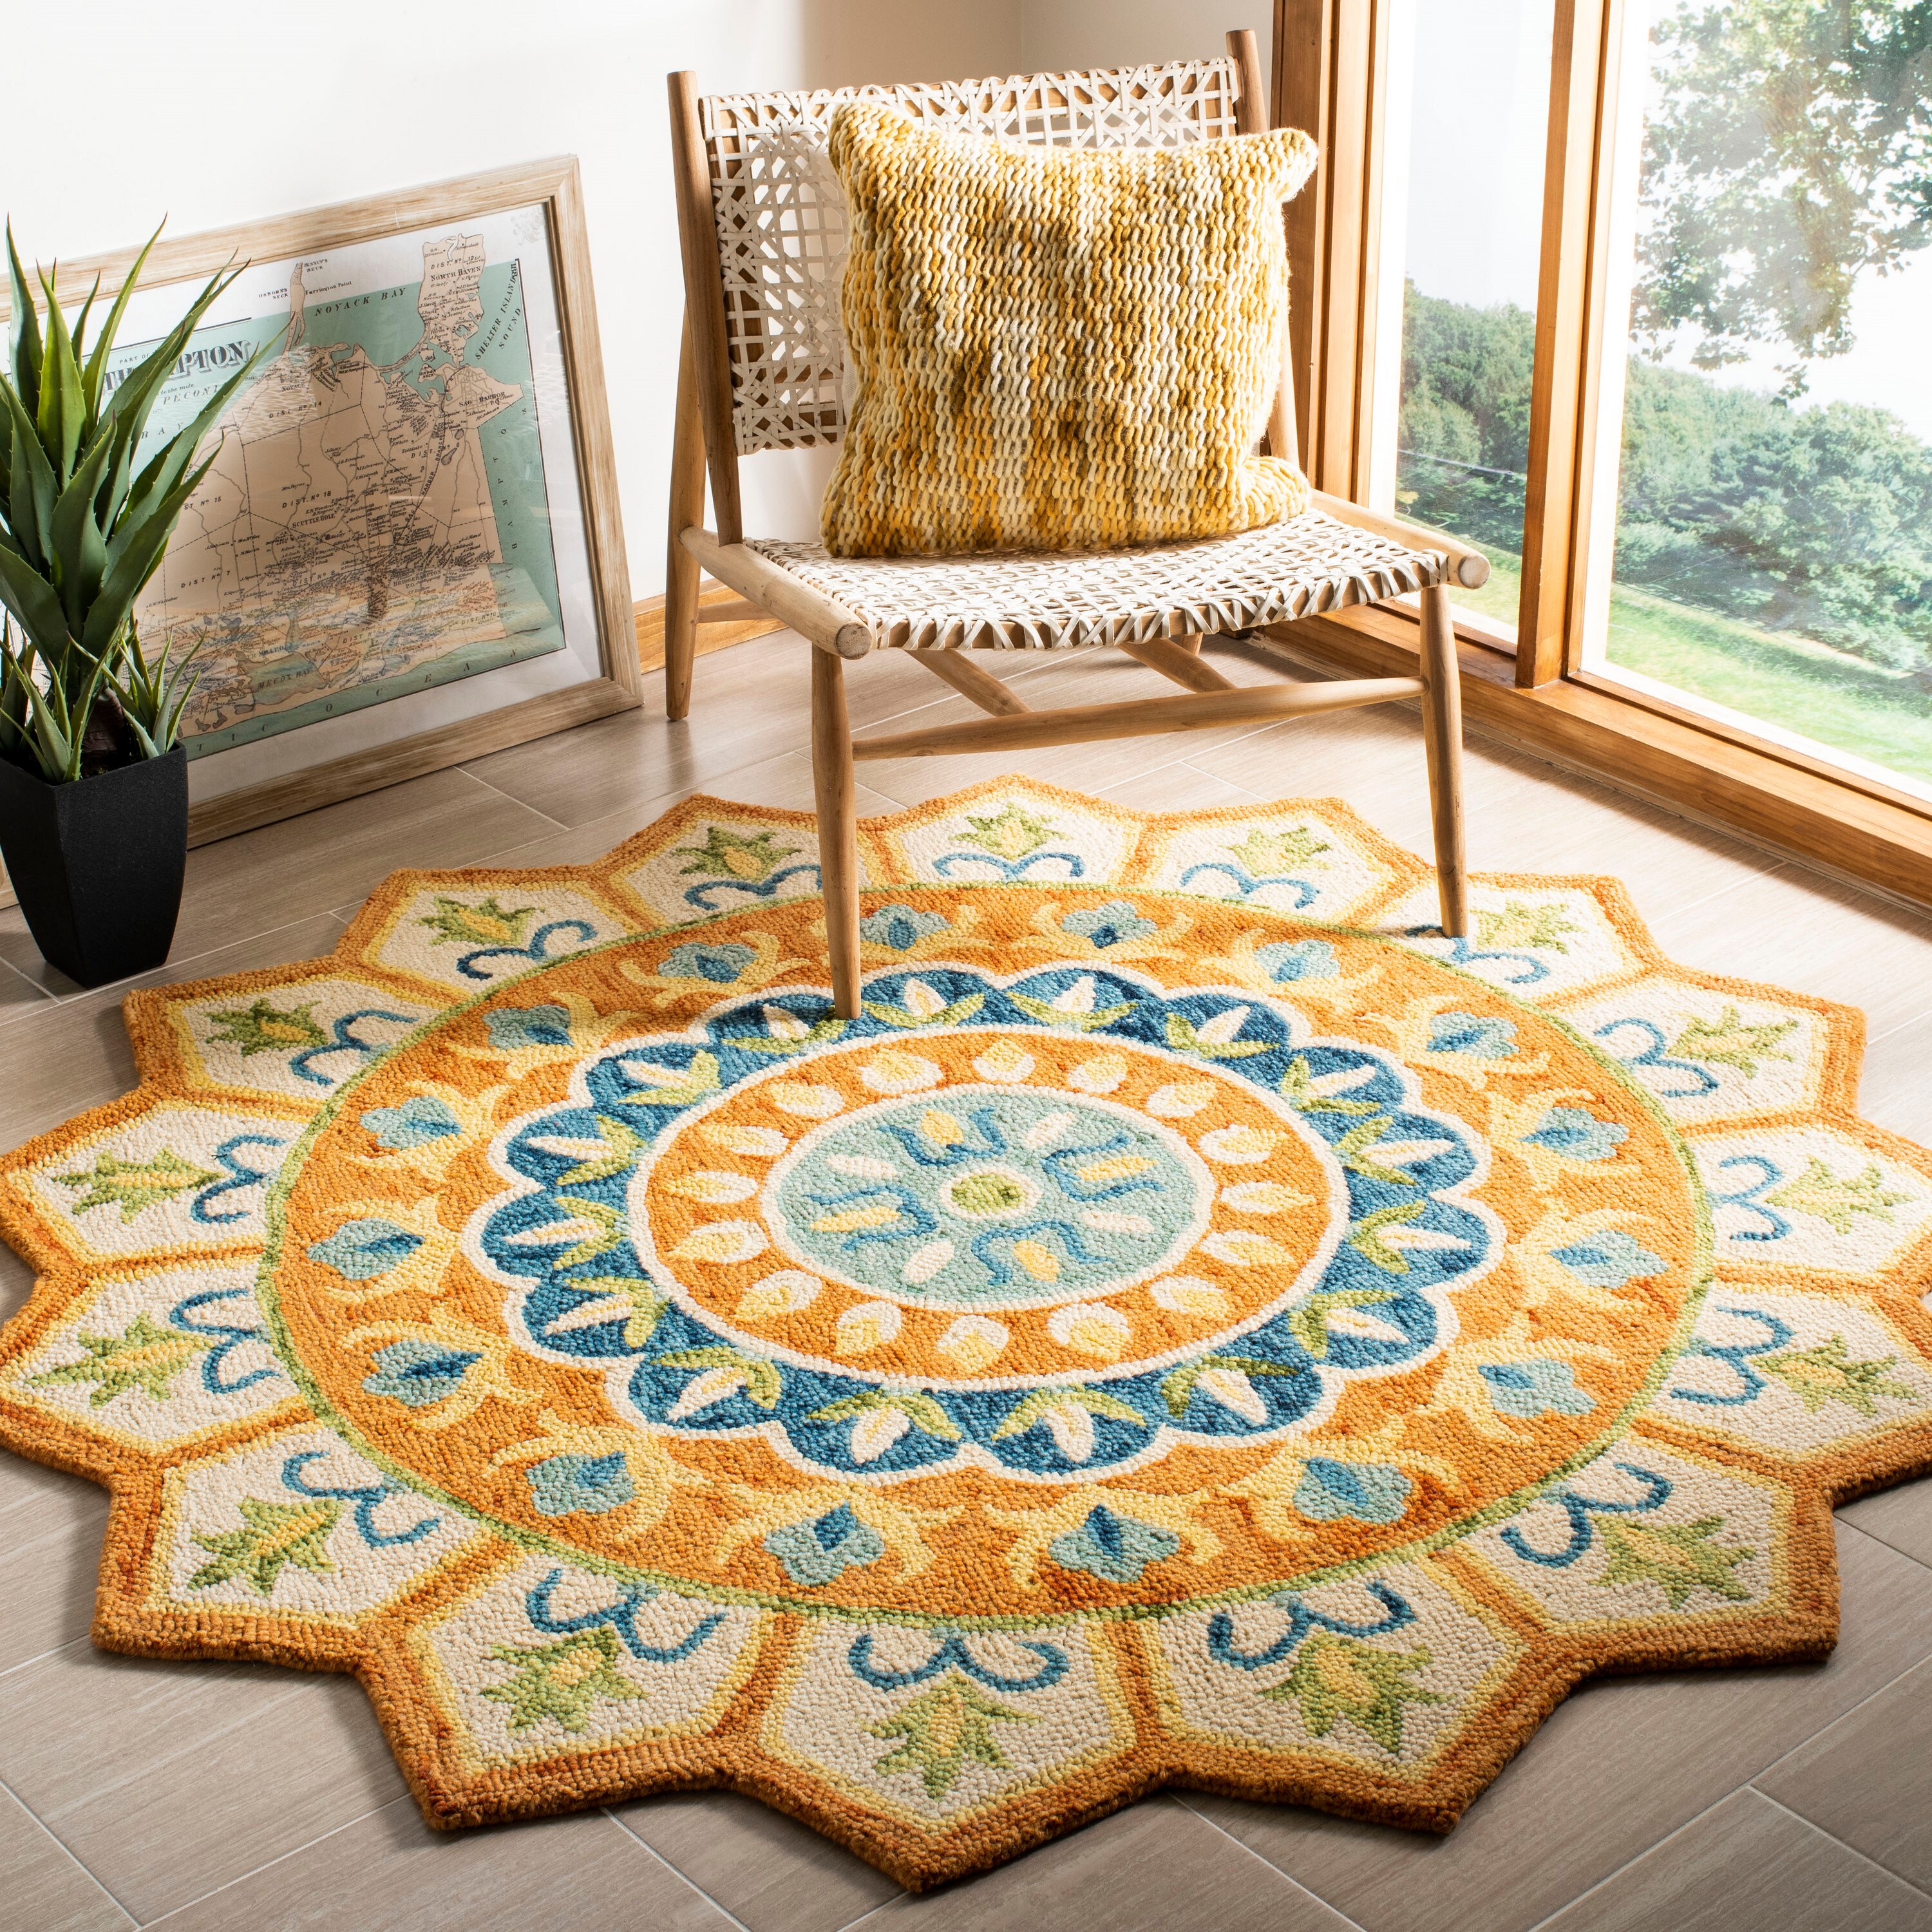 6ft Round Novelty Multi-Color Round Area Rugs for Living Room